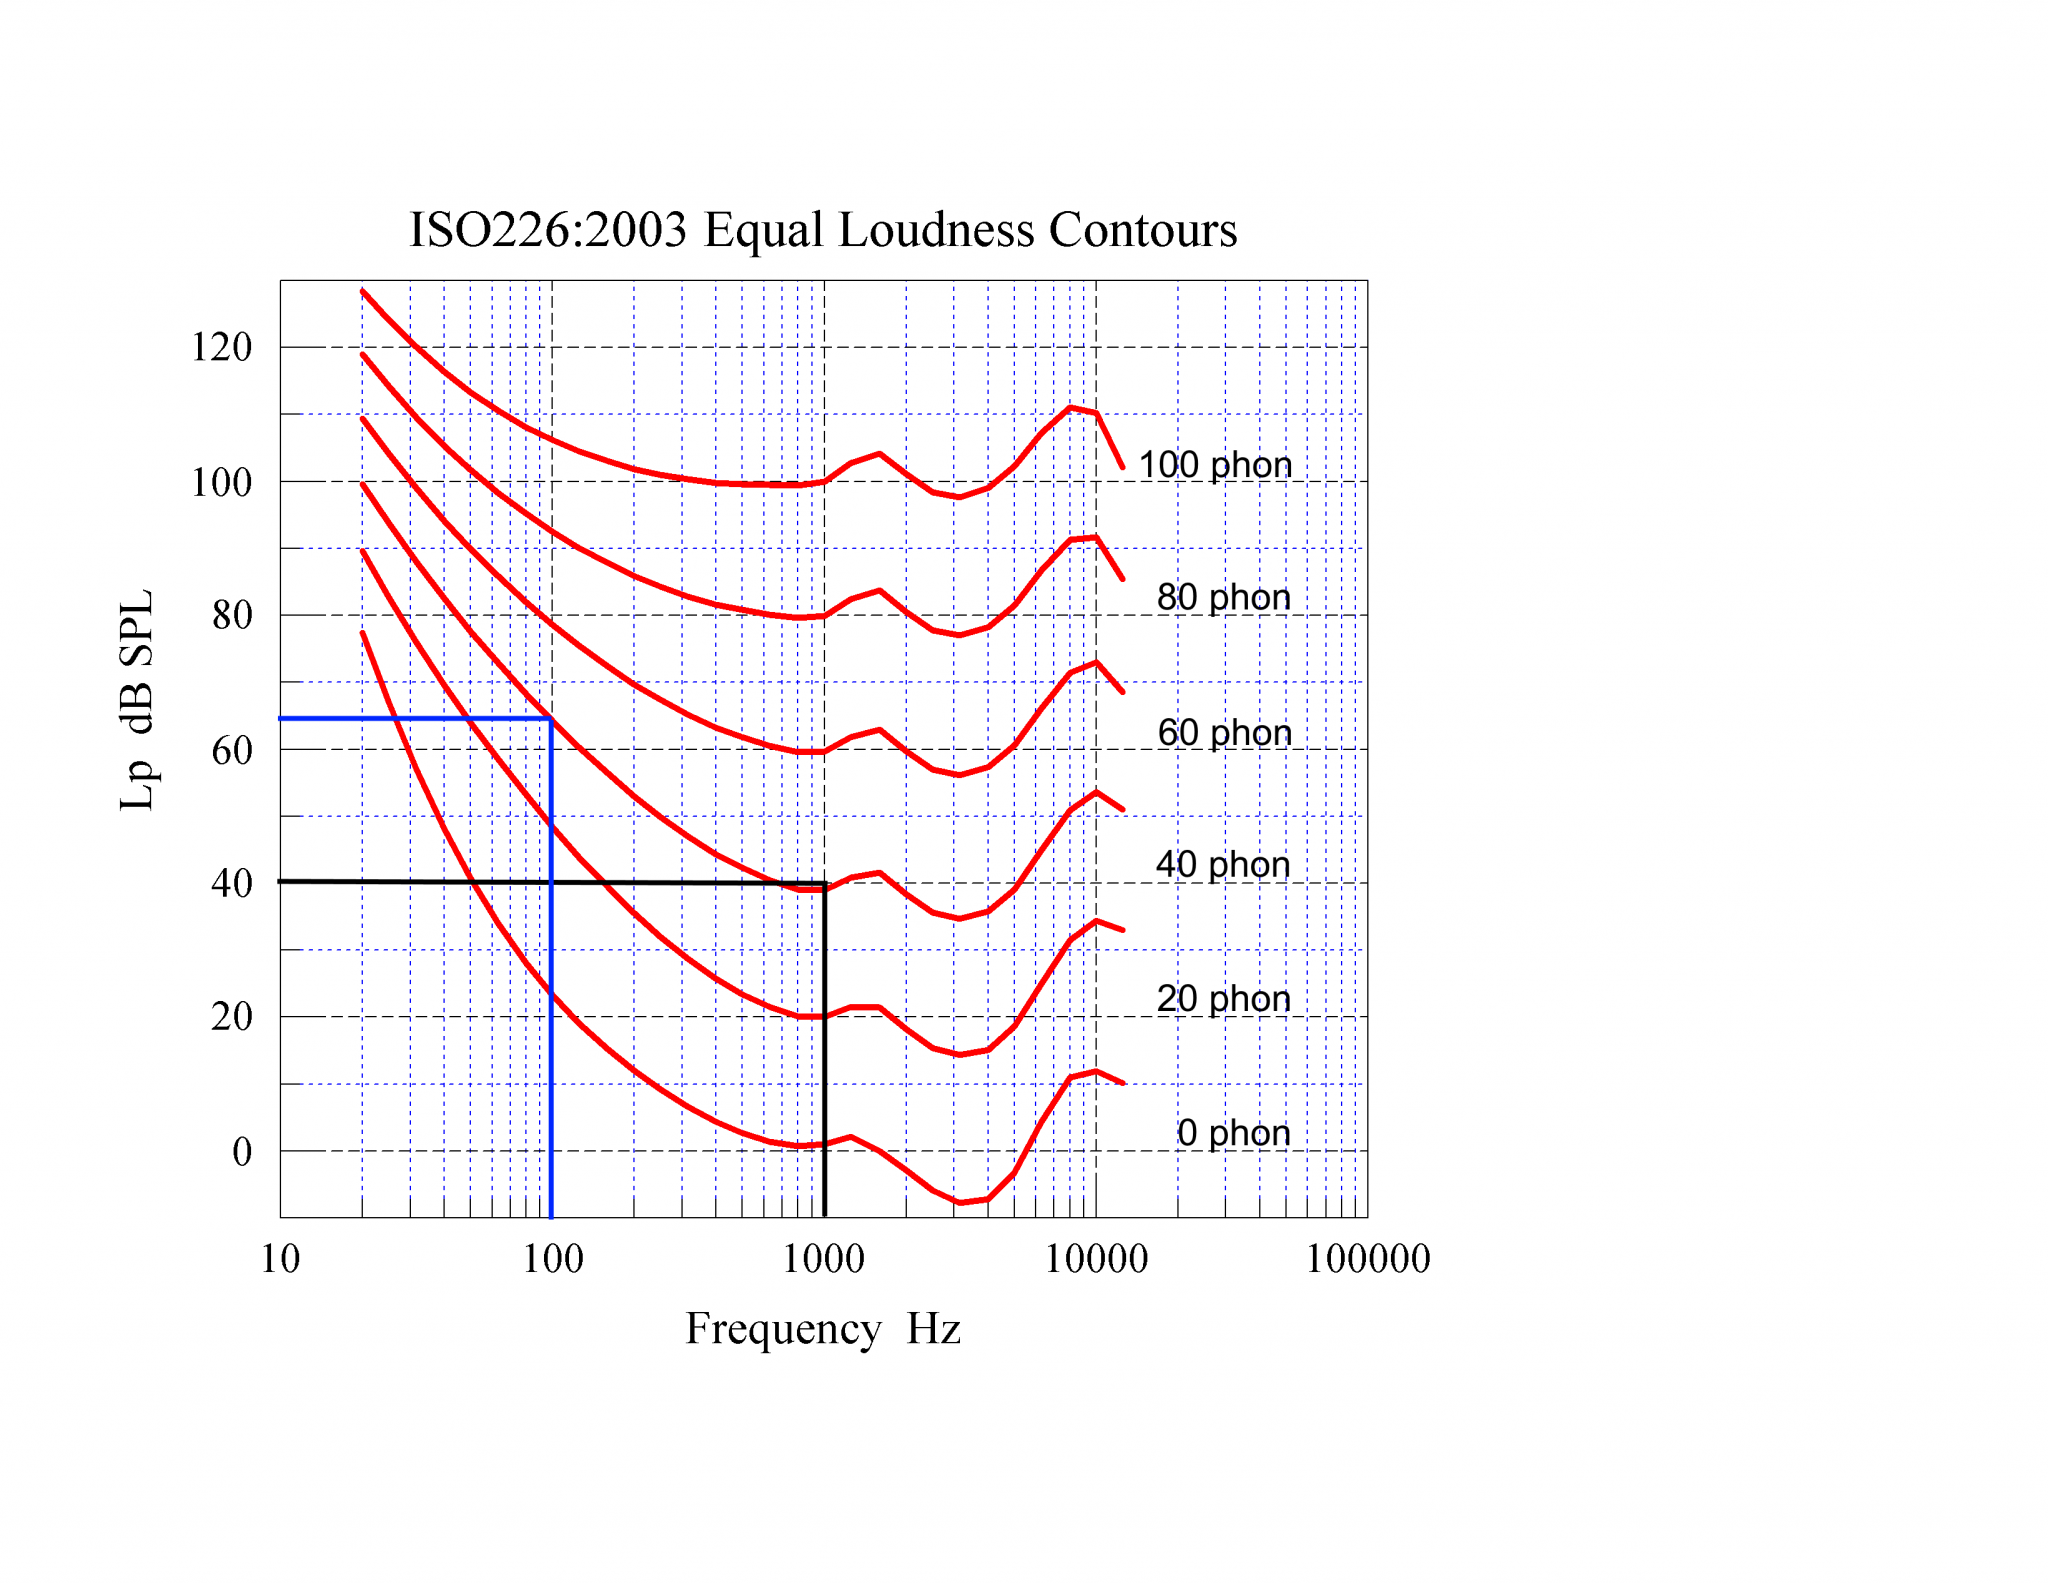 02 iso226-2003 Equal Loudness Contours - 40 phon 100 Hz and 1000 Hz.png